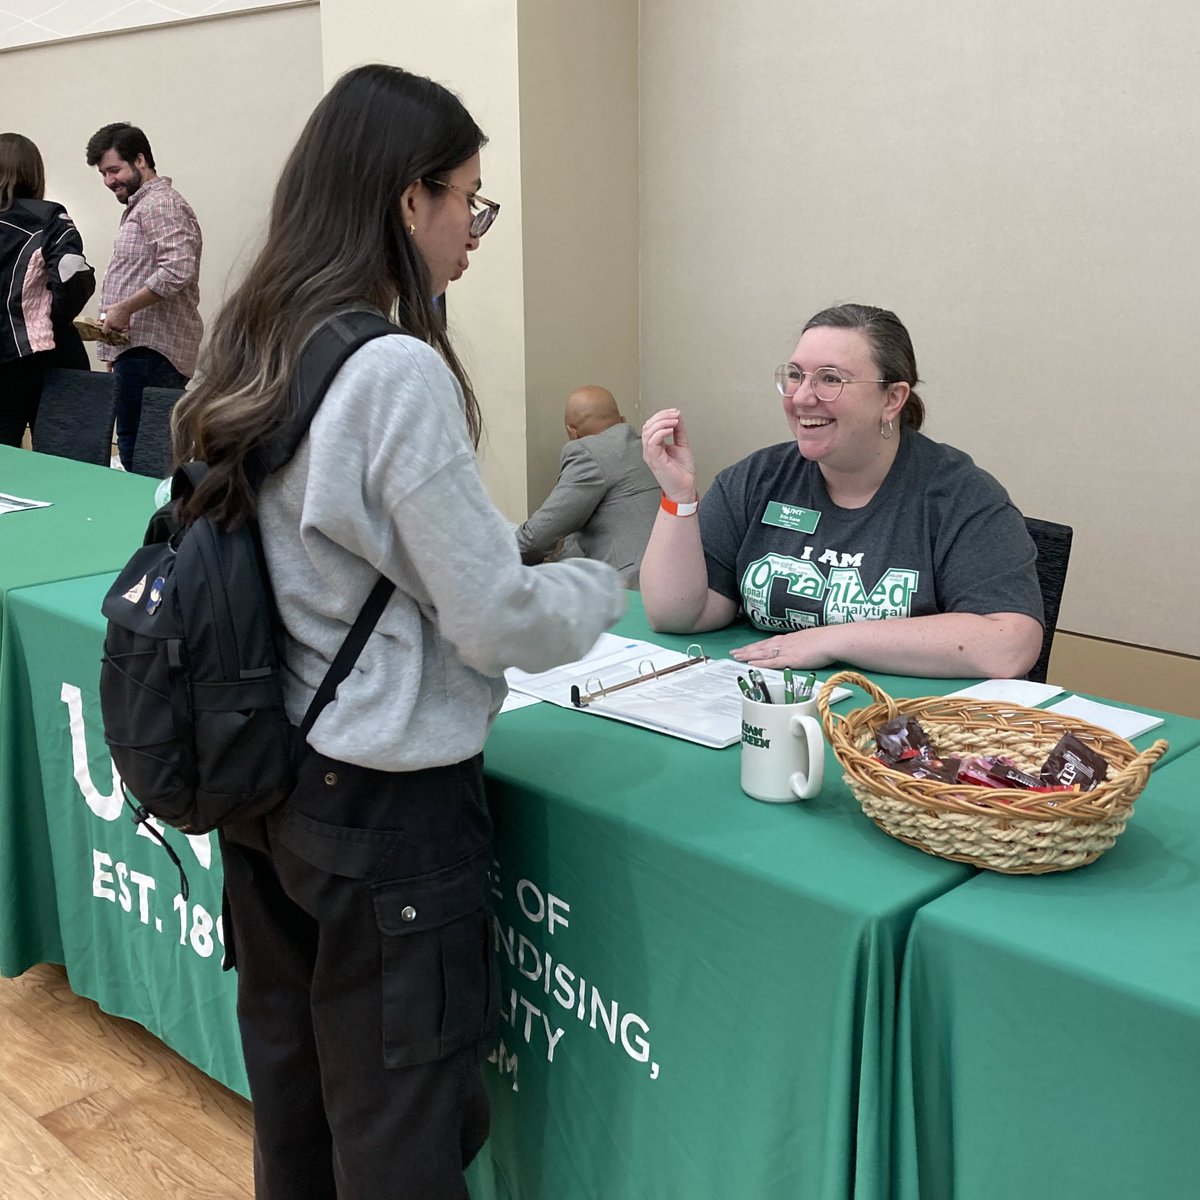 UNT staff mobilize in full force to support Fall Preview this weekend with food, fun, and information. #UNT #FallPreview #GMG #UNTStaff #Welcome #Transfer #Advising